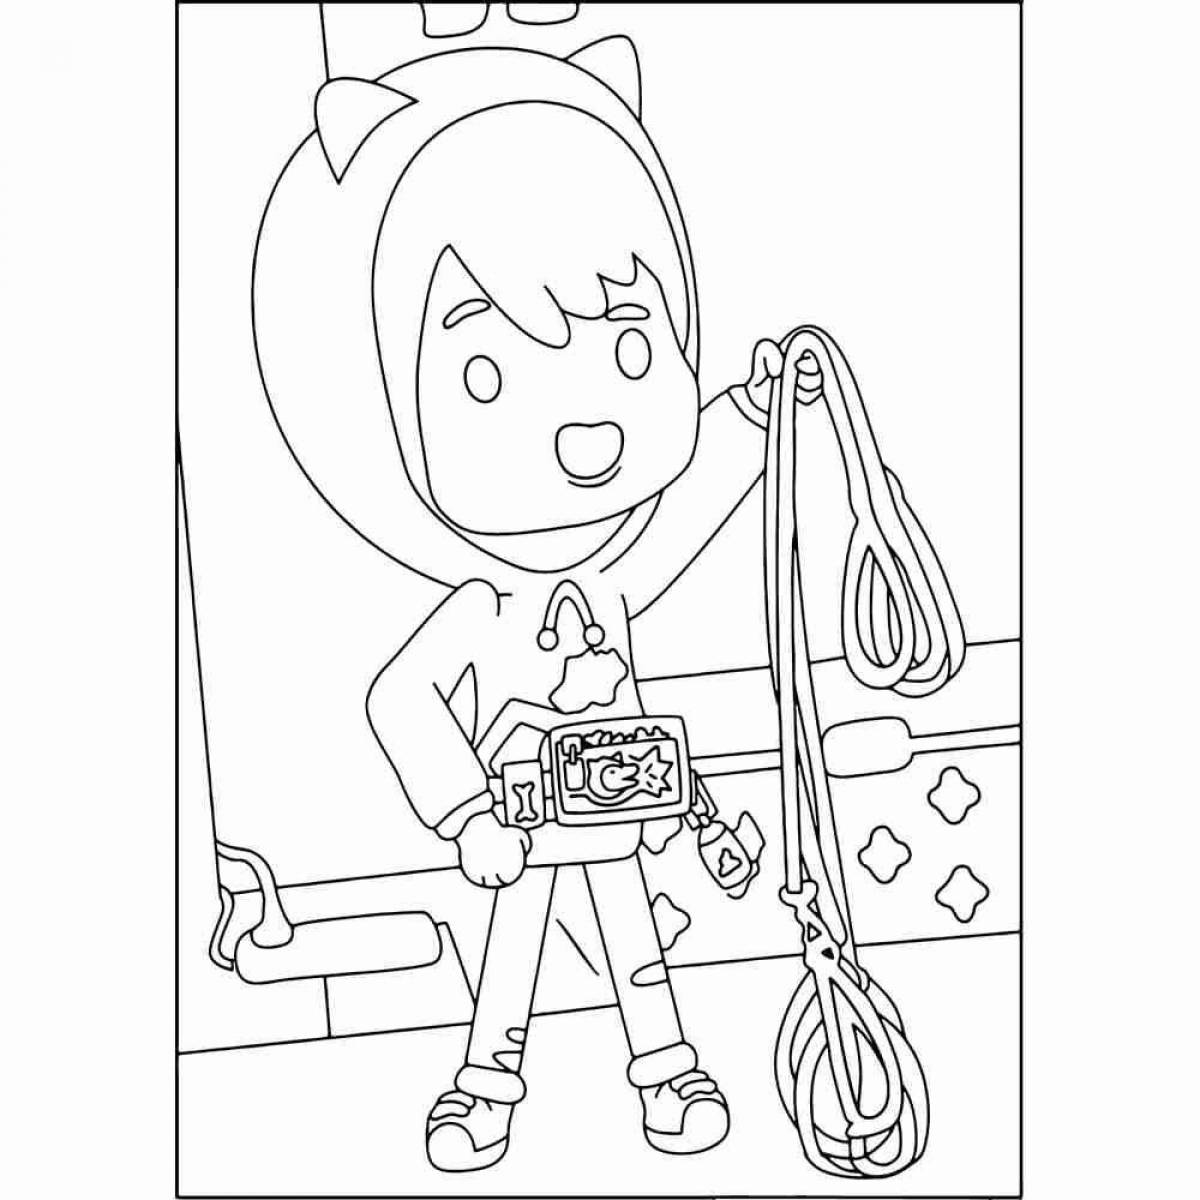 Coloring page funny boys from the side